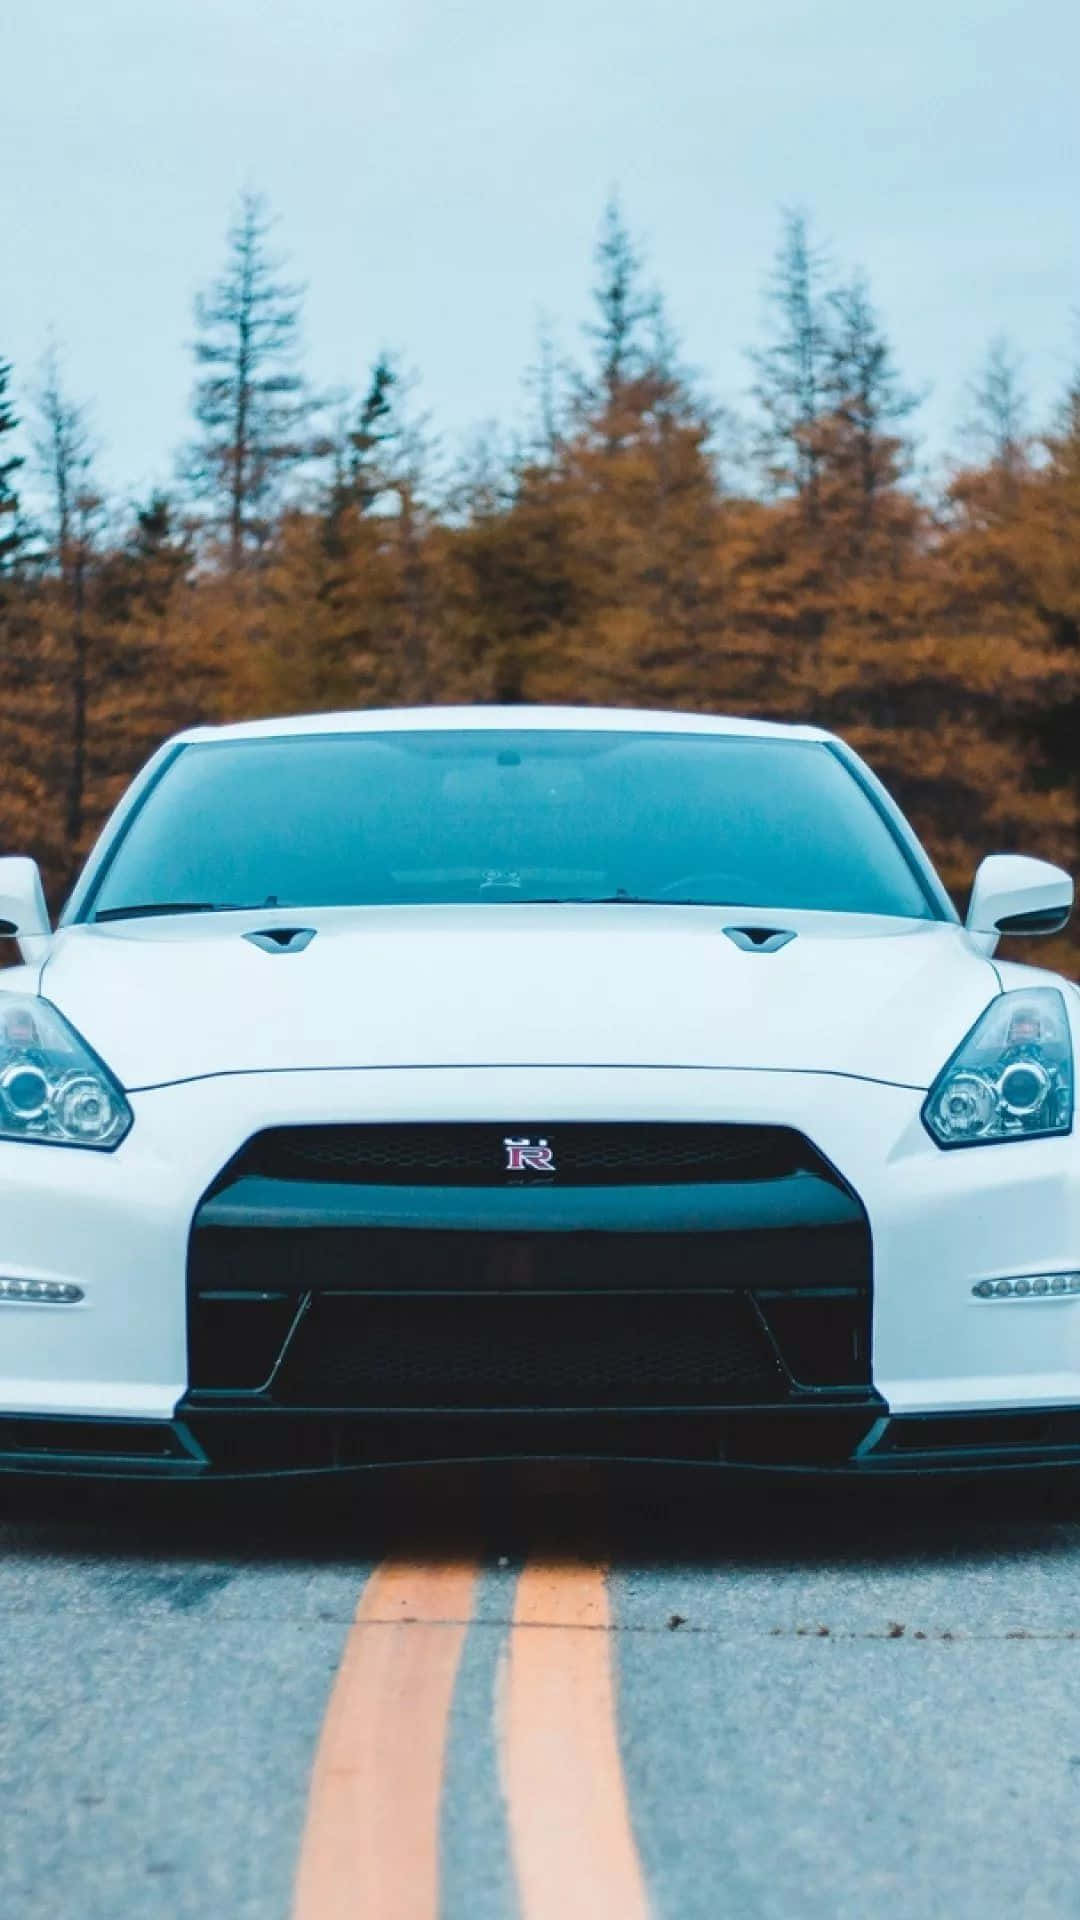 A White Nissan Gtr Parked On The Road Wallpaper